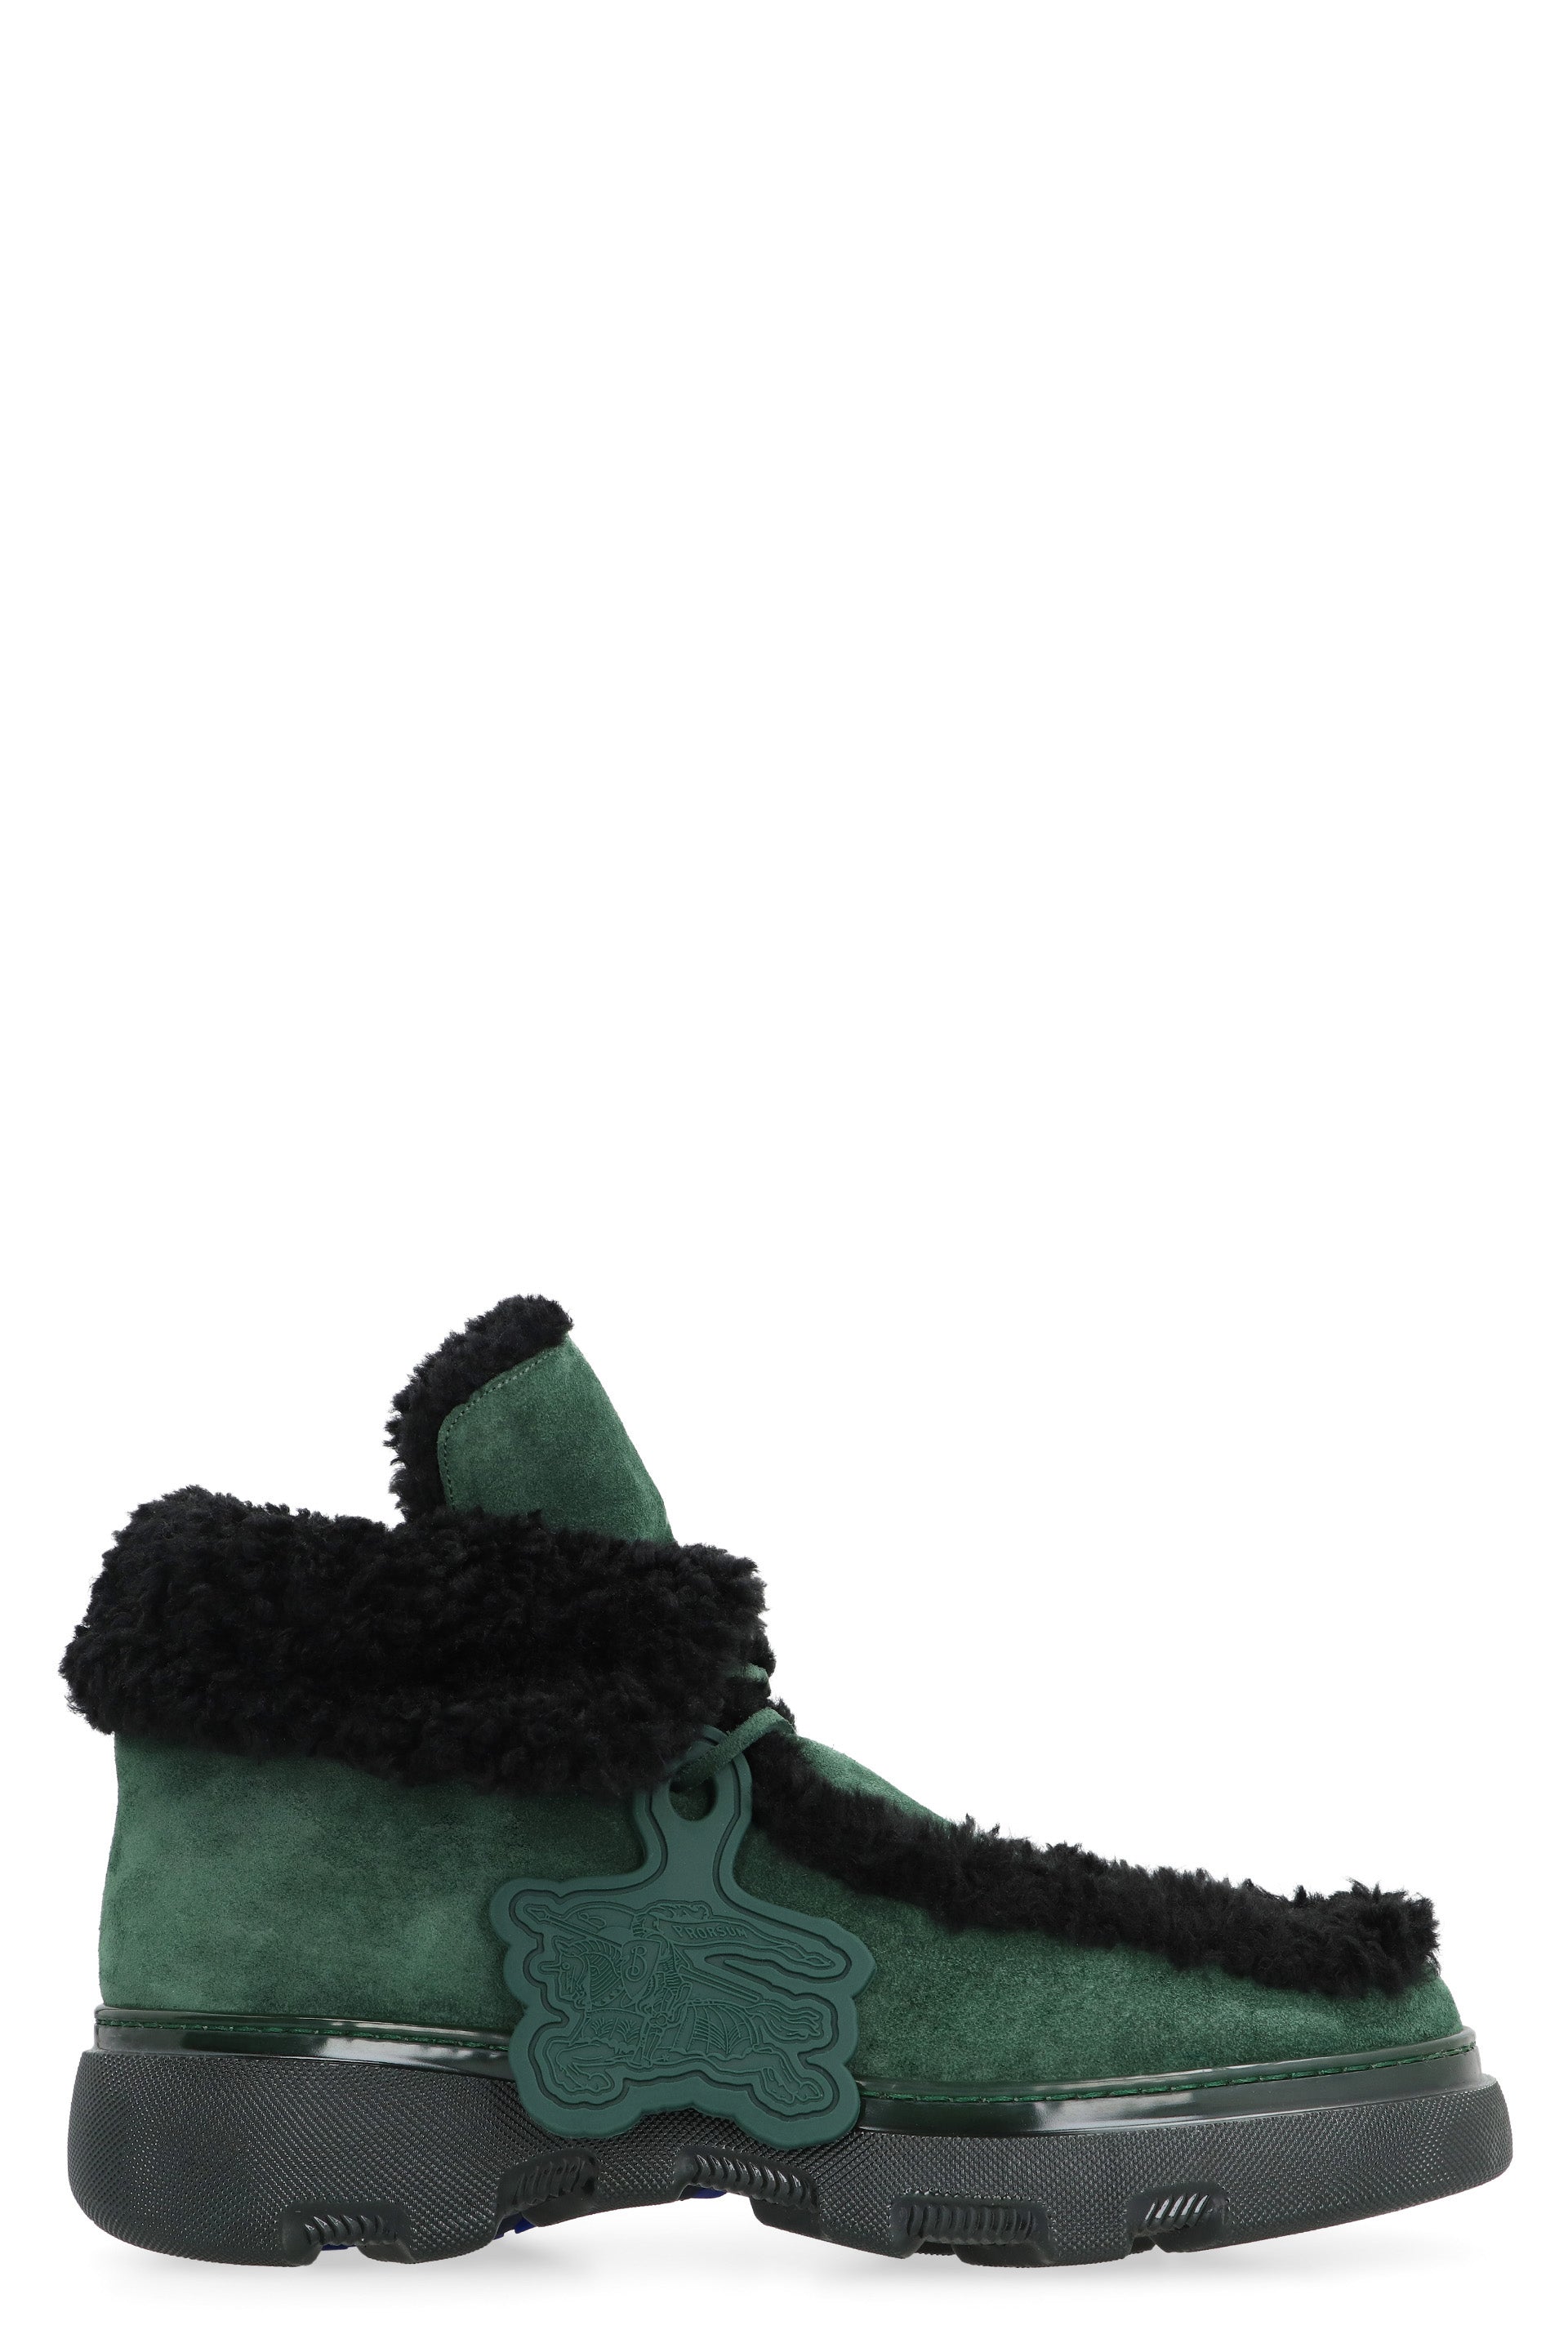 Shop Burberry Green Shearling Ankle Boots For Men